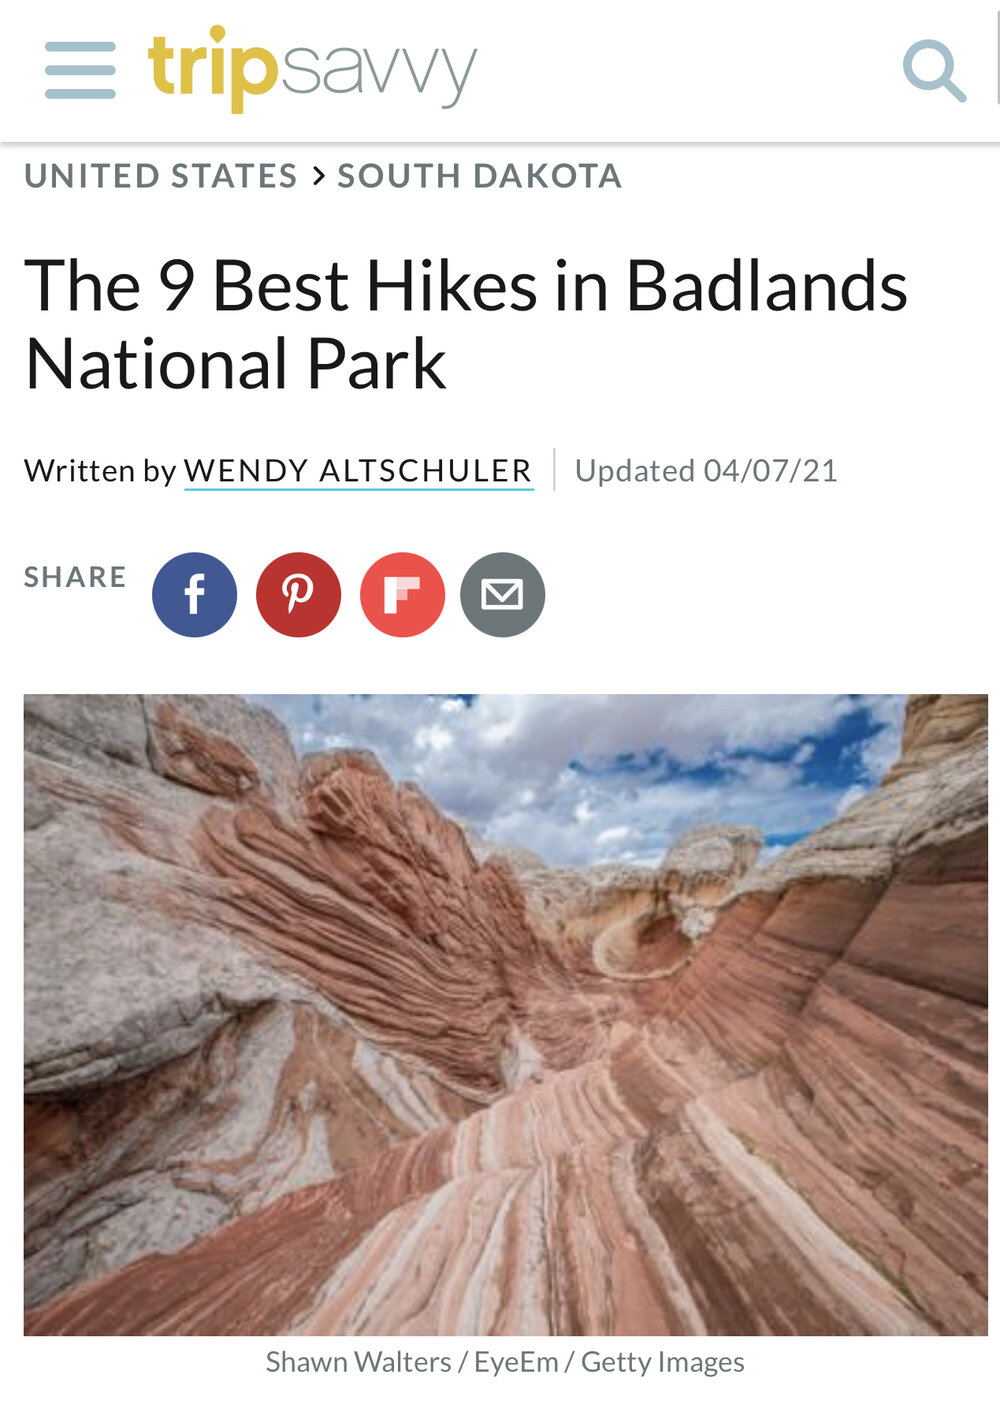  The 9 Best Hikes in Badlands National Park